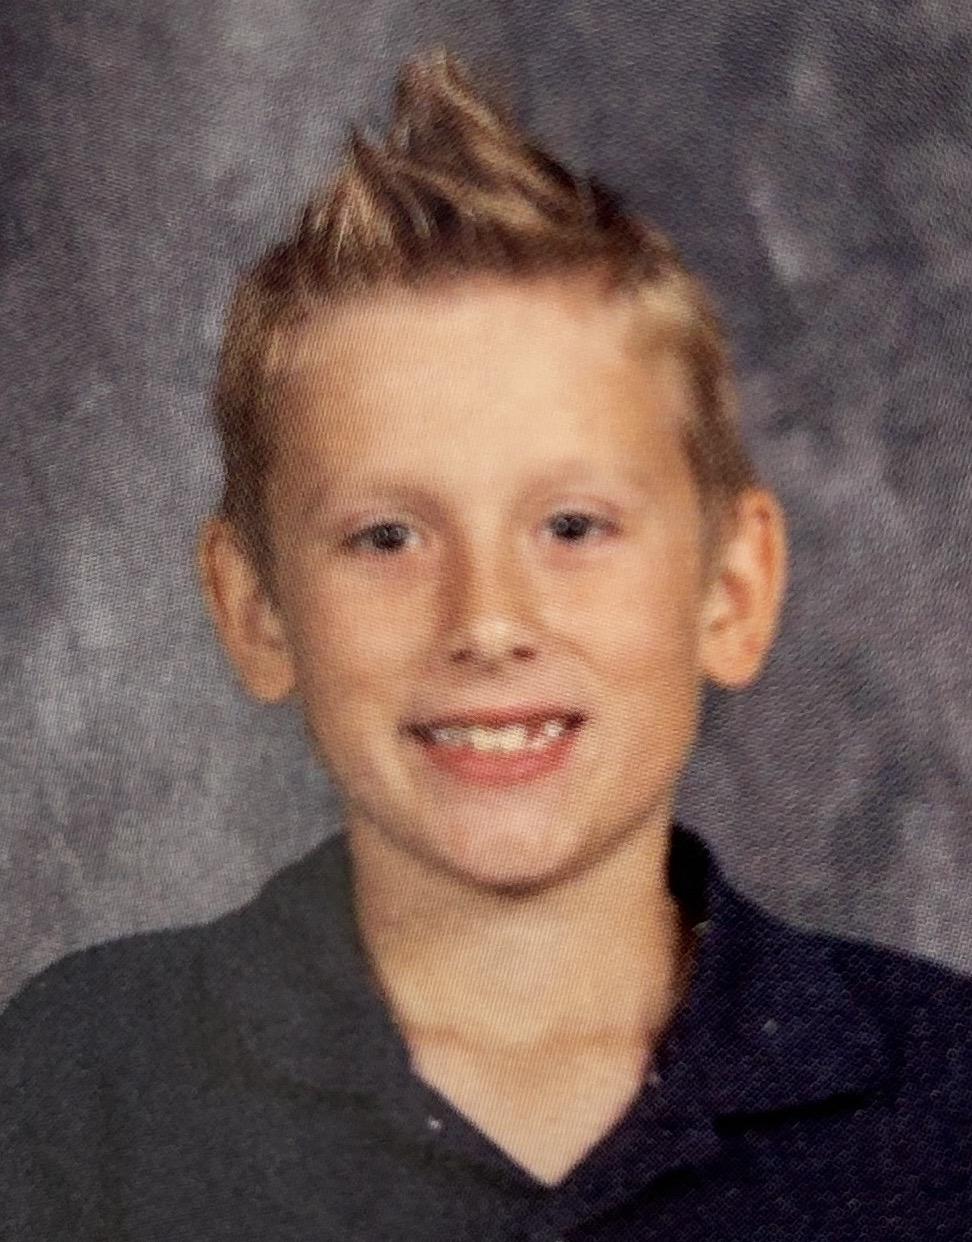 A photo of Matthew from a Trafford Elementary School yearbook